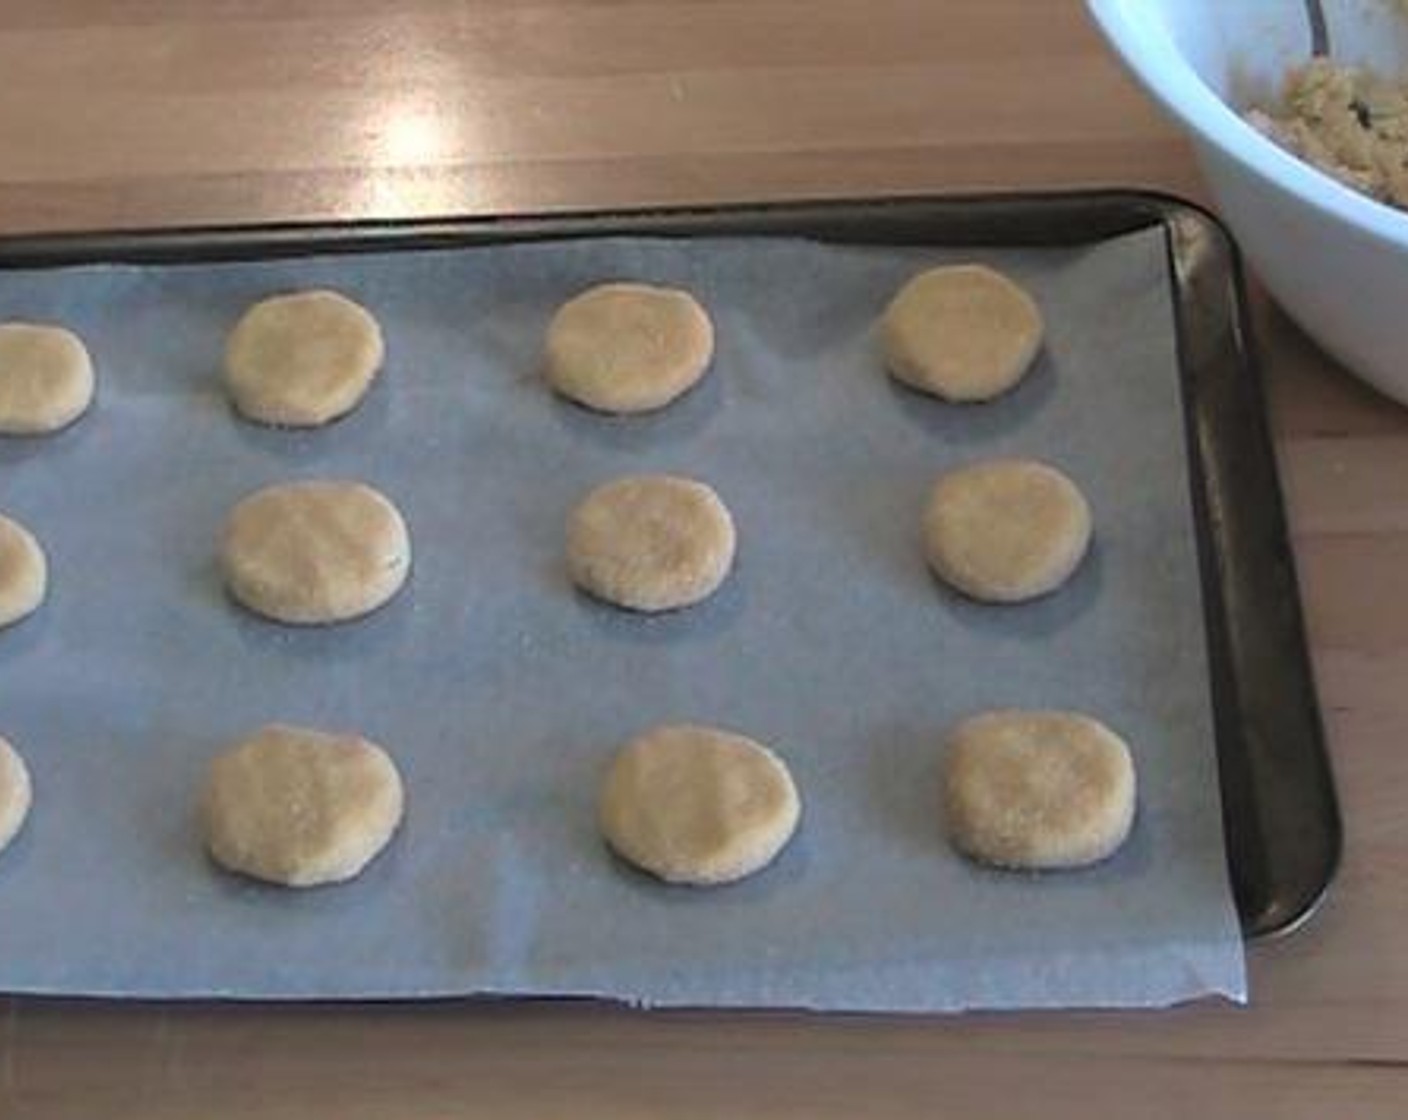 step 3 Make the dough into small round cookies. Roll each cookie dough on the Cinnamon Sugar (to taste), and place it on a baking tray lined with baking paper. Bake under 180 degrees C (350 degrees F) for about 8 minutes.